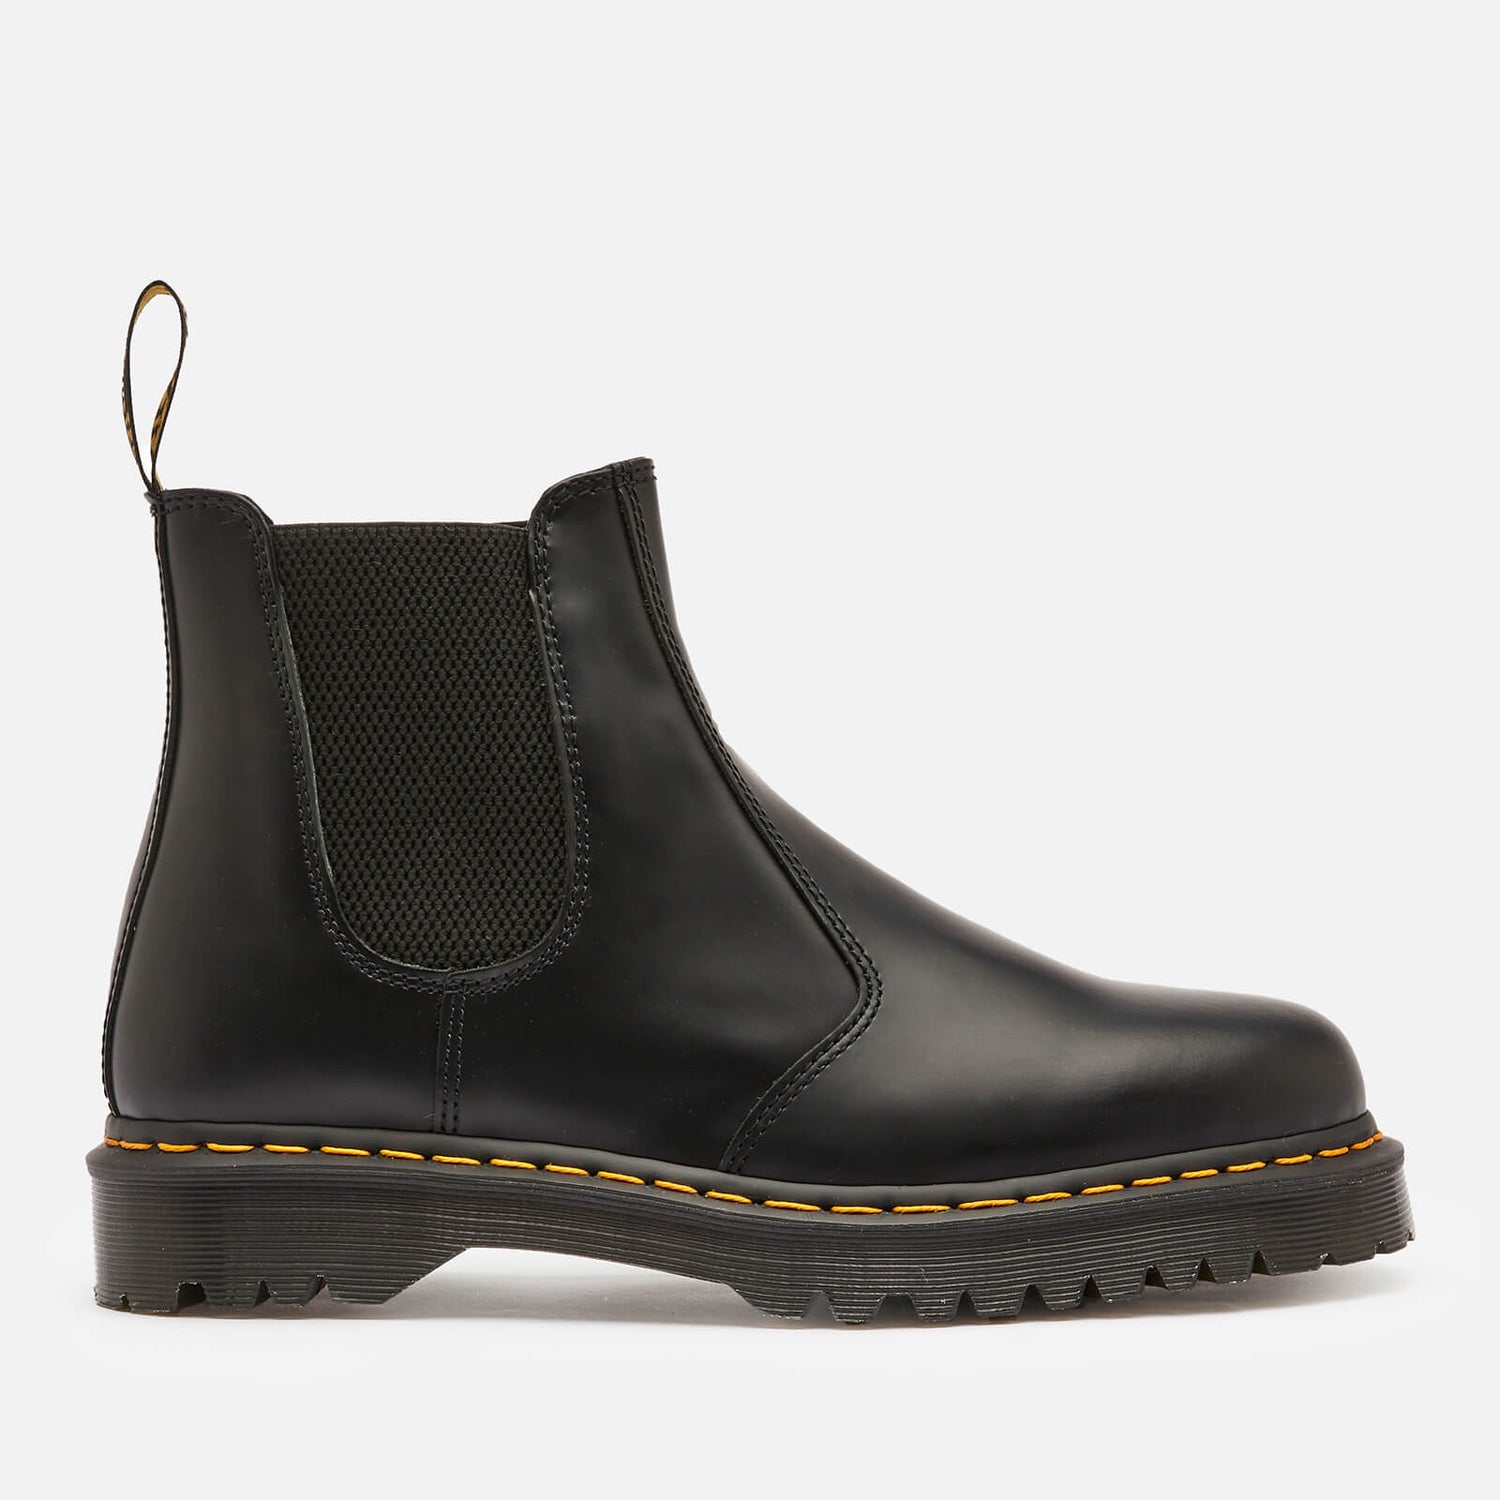 Dr. Martens 2976 Bex Smooth Leather Chelsea Boots - Black - UK 8